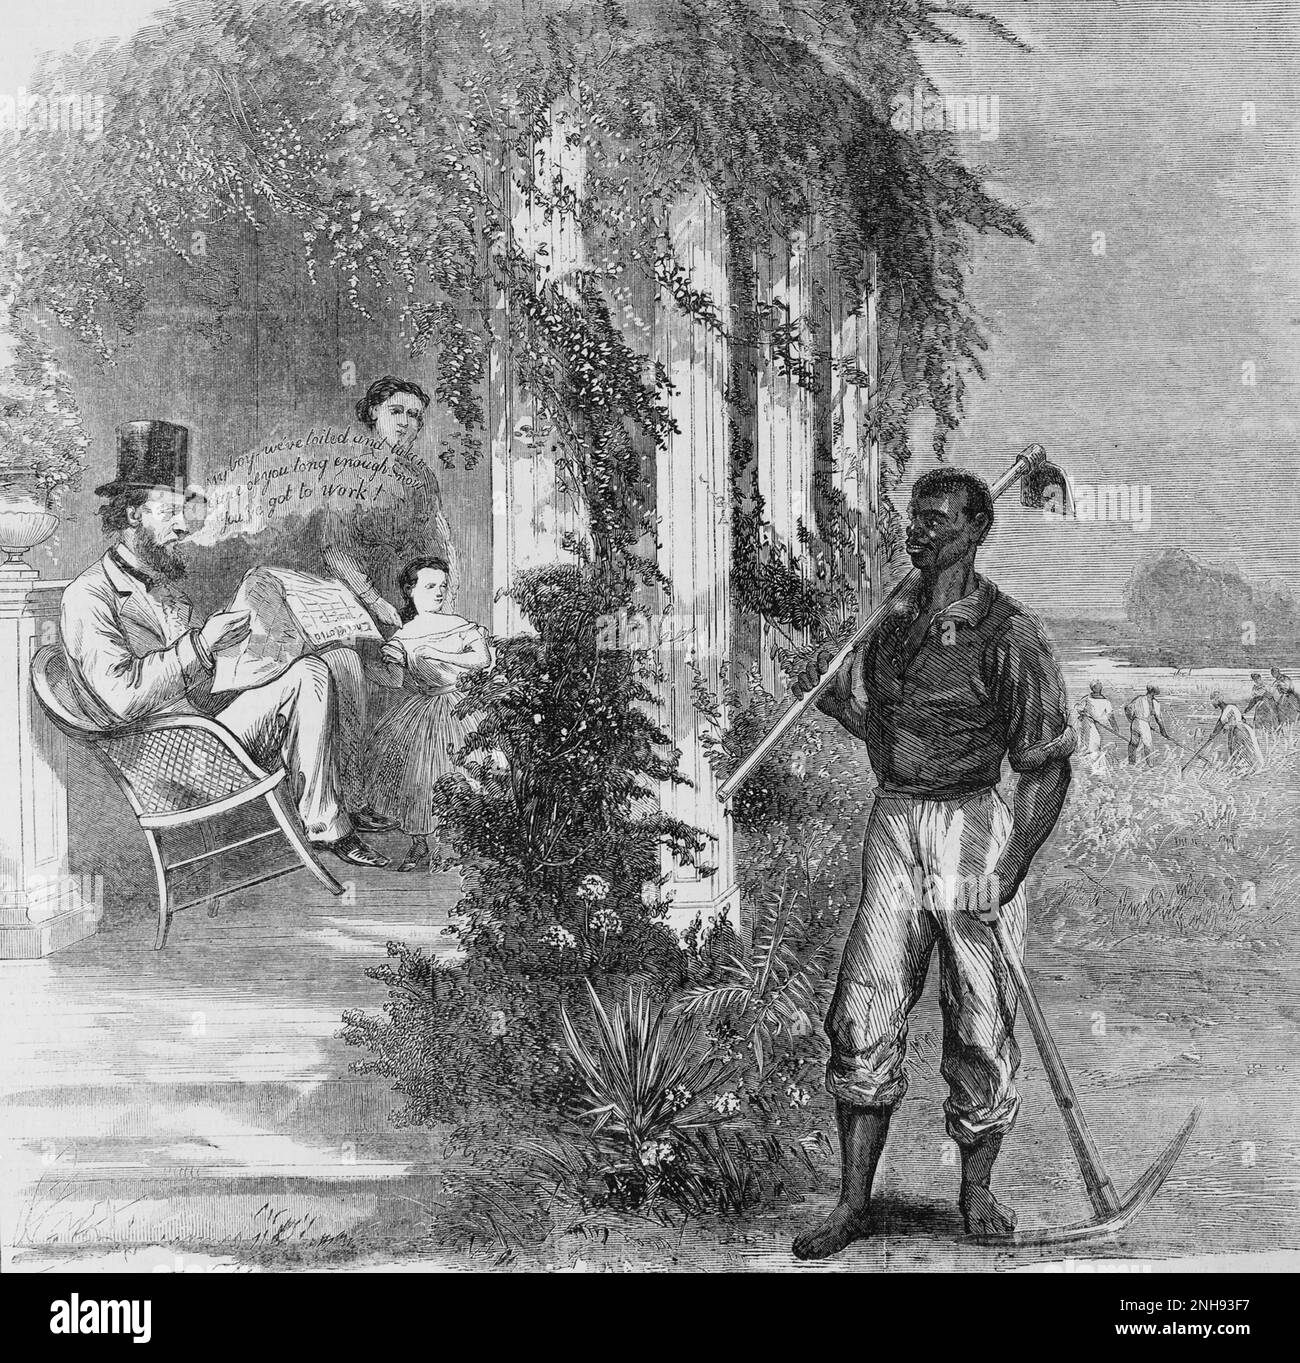 A satirical illustration of 'the great labor question from a Southern point of view': a white man, relaxing on a plantation porch with his family, says to a black man standing nearby with pick and hoe, 'My boy - we've toiled and taken care of you long enough - now you've got to work!' Harper's Weekly, July 29, 1865. Stock Photo